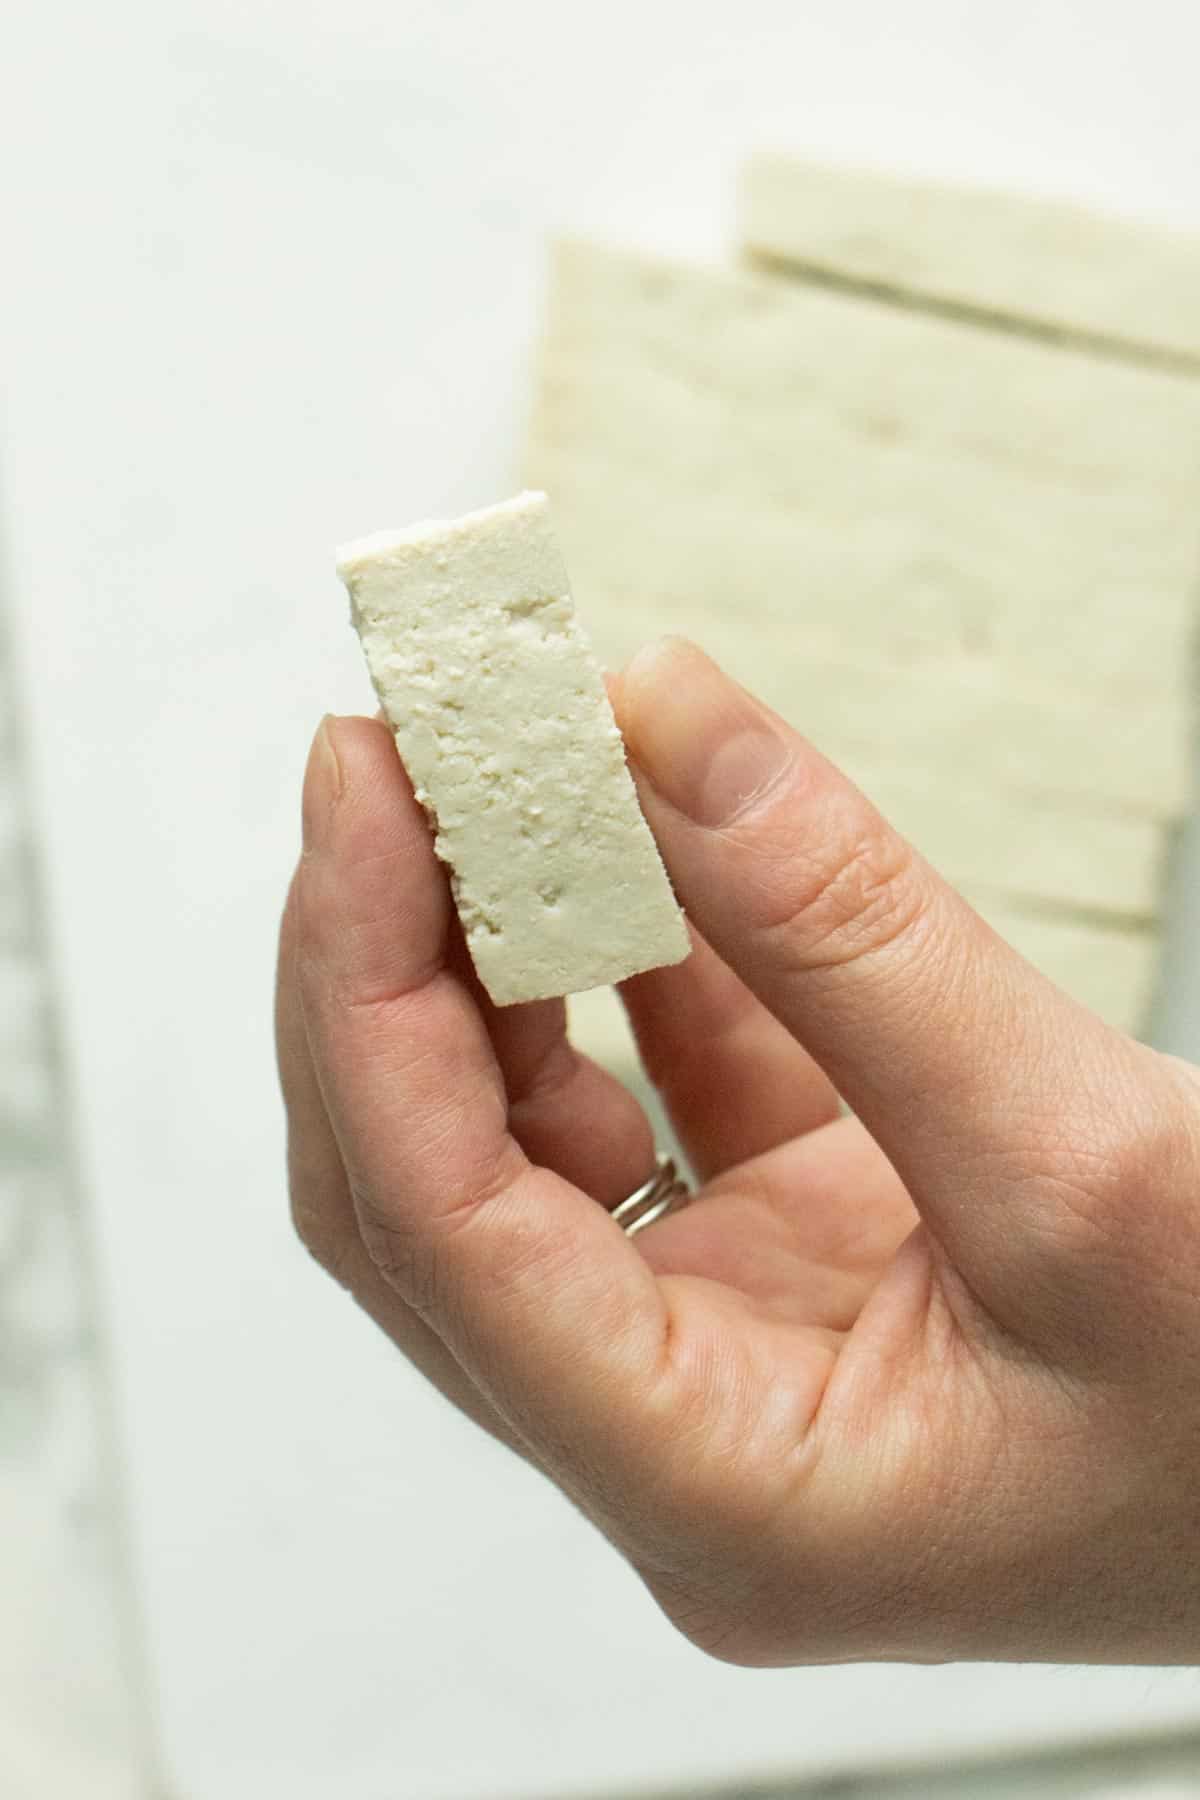 close-up of a tofu piece, so you can see the size and shape